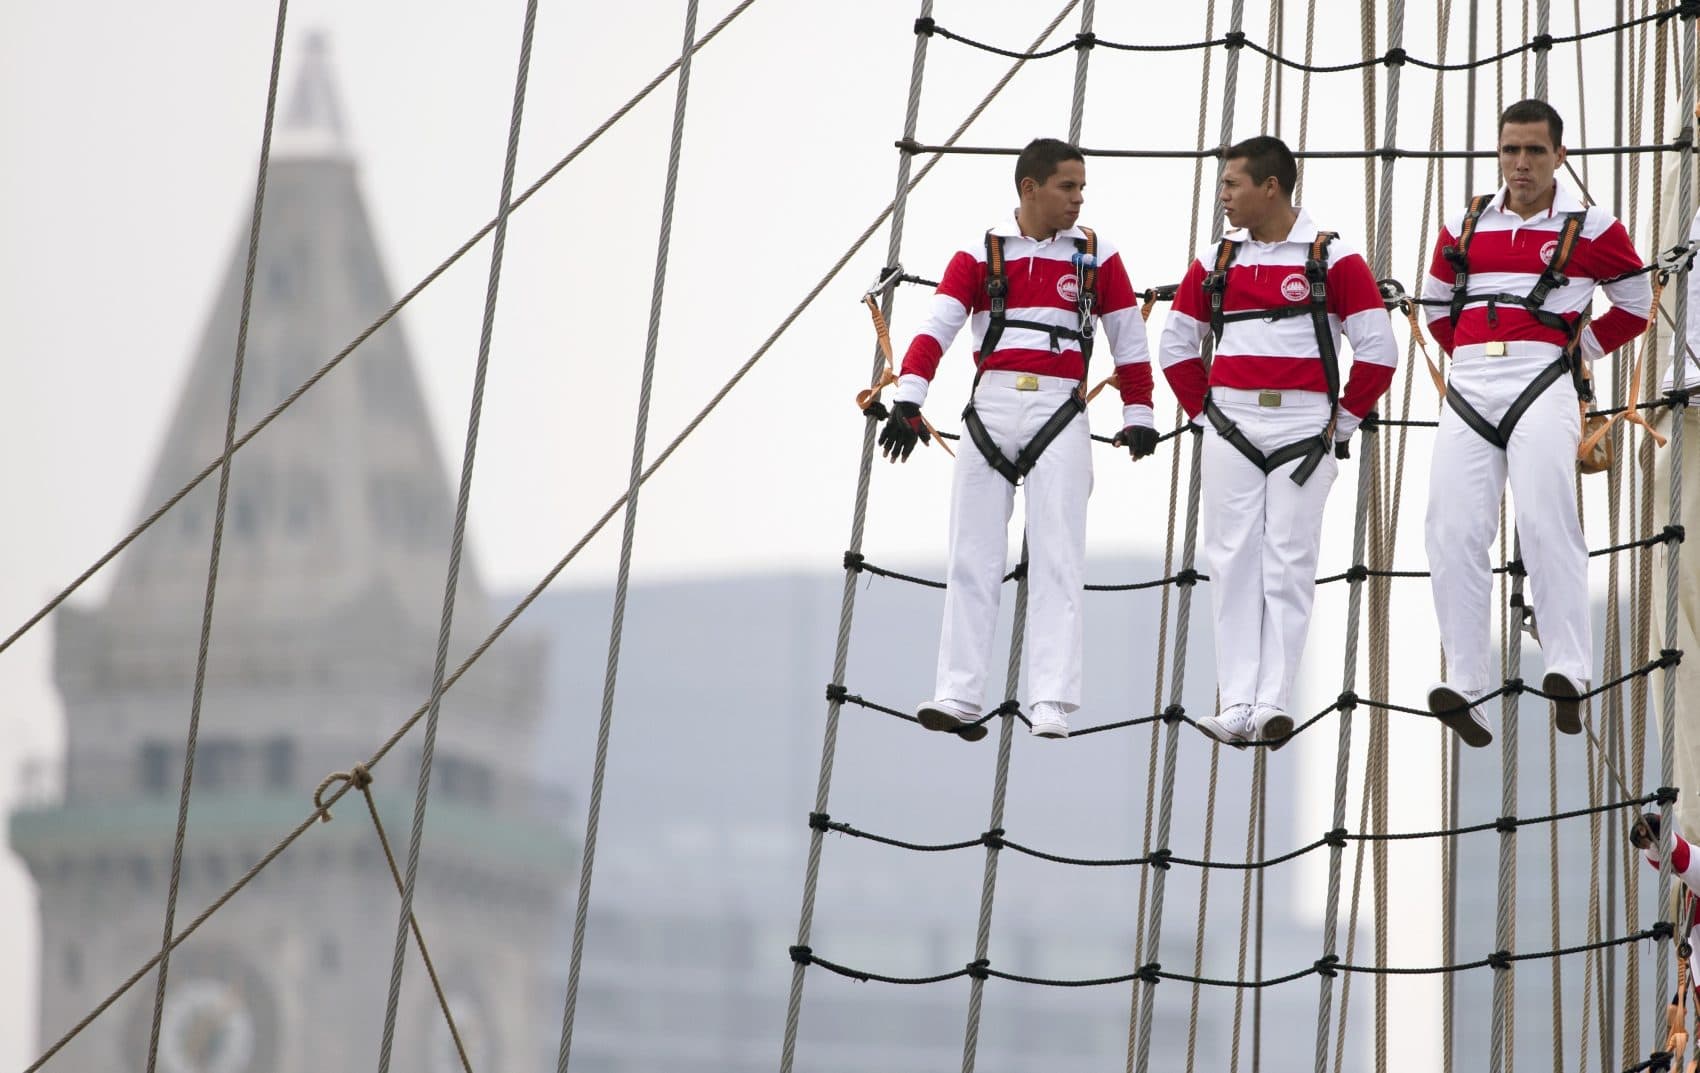 Sailors on the rigging of the Peruvian Navy tall ship Union. (Michael Dwyer/AP)